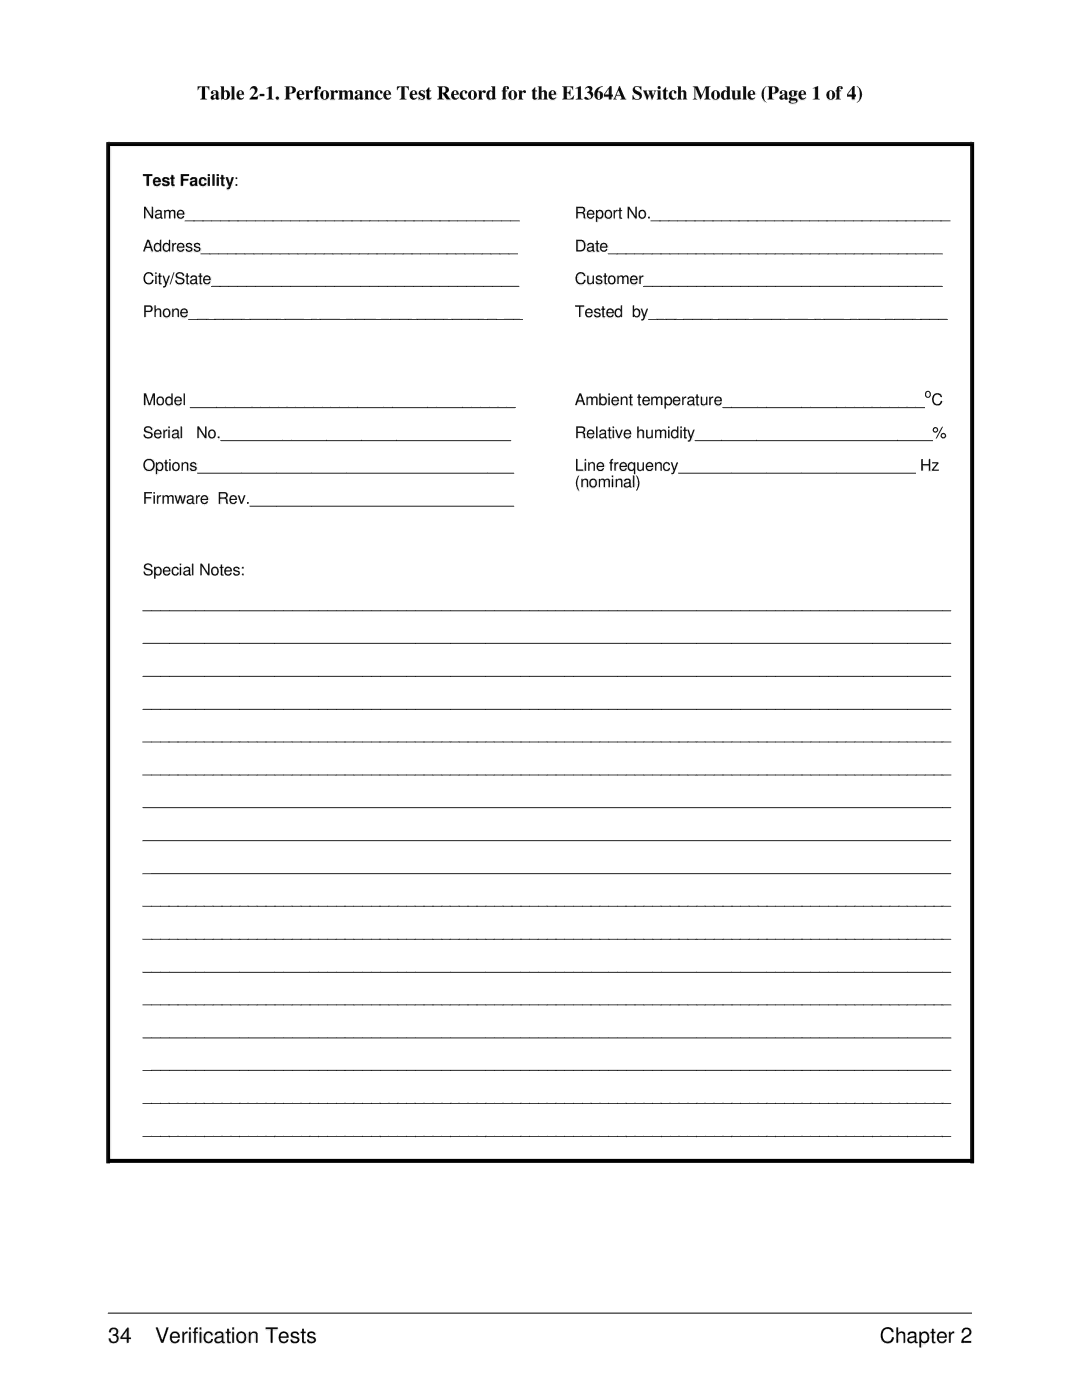 Agilent Technologies service manual Performance Test Record for the E1364A Switch Module Page 1 